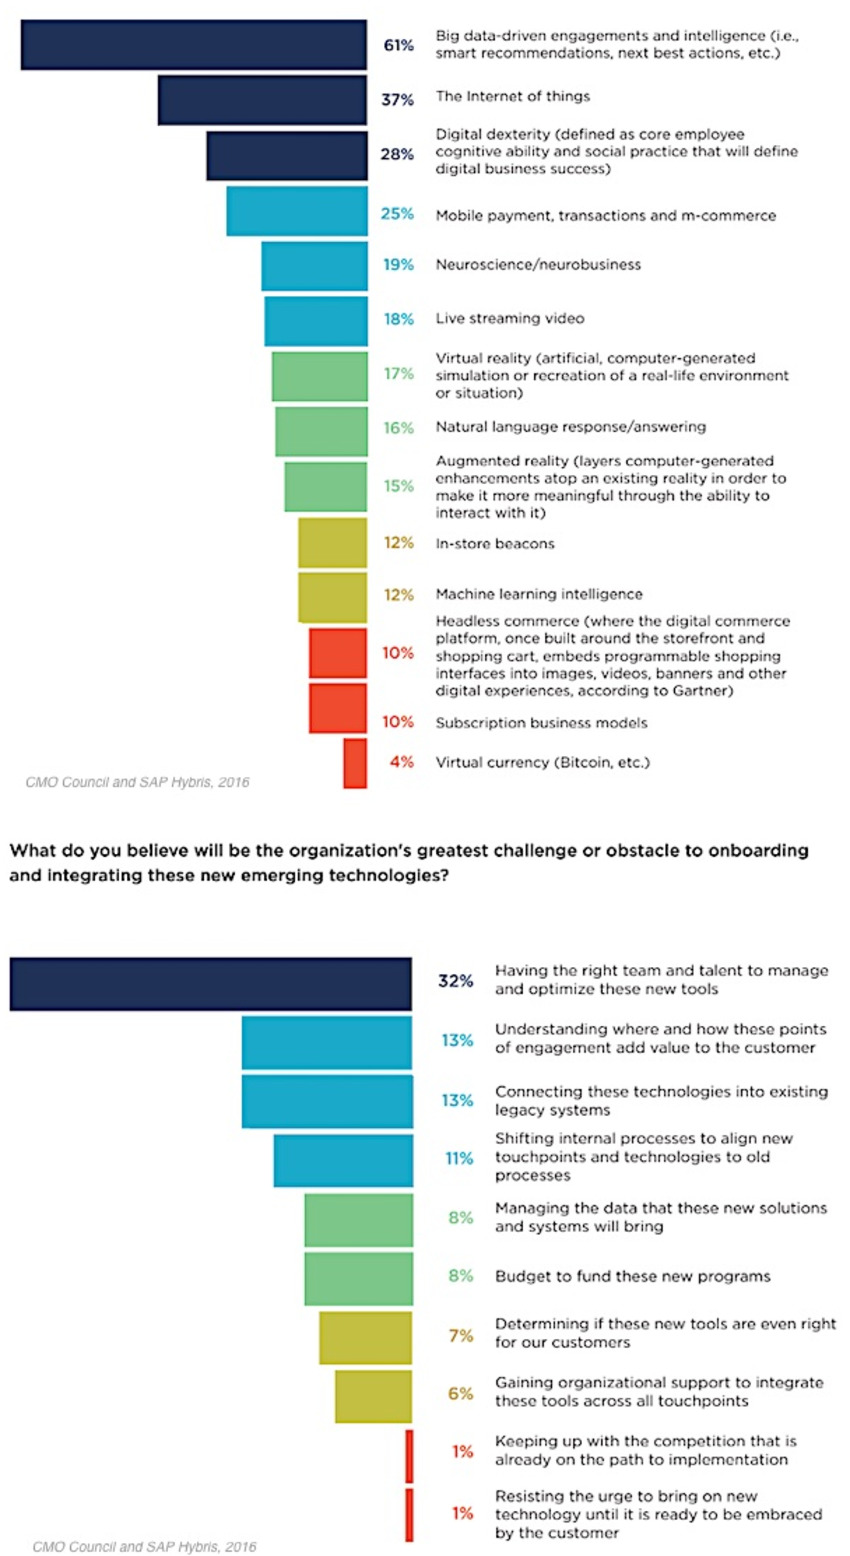 CMO Survey: Which Emerging Technology Will Transform the Customer Experience? - Profs | The MarTech Digest | Scoop.it